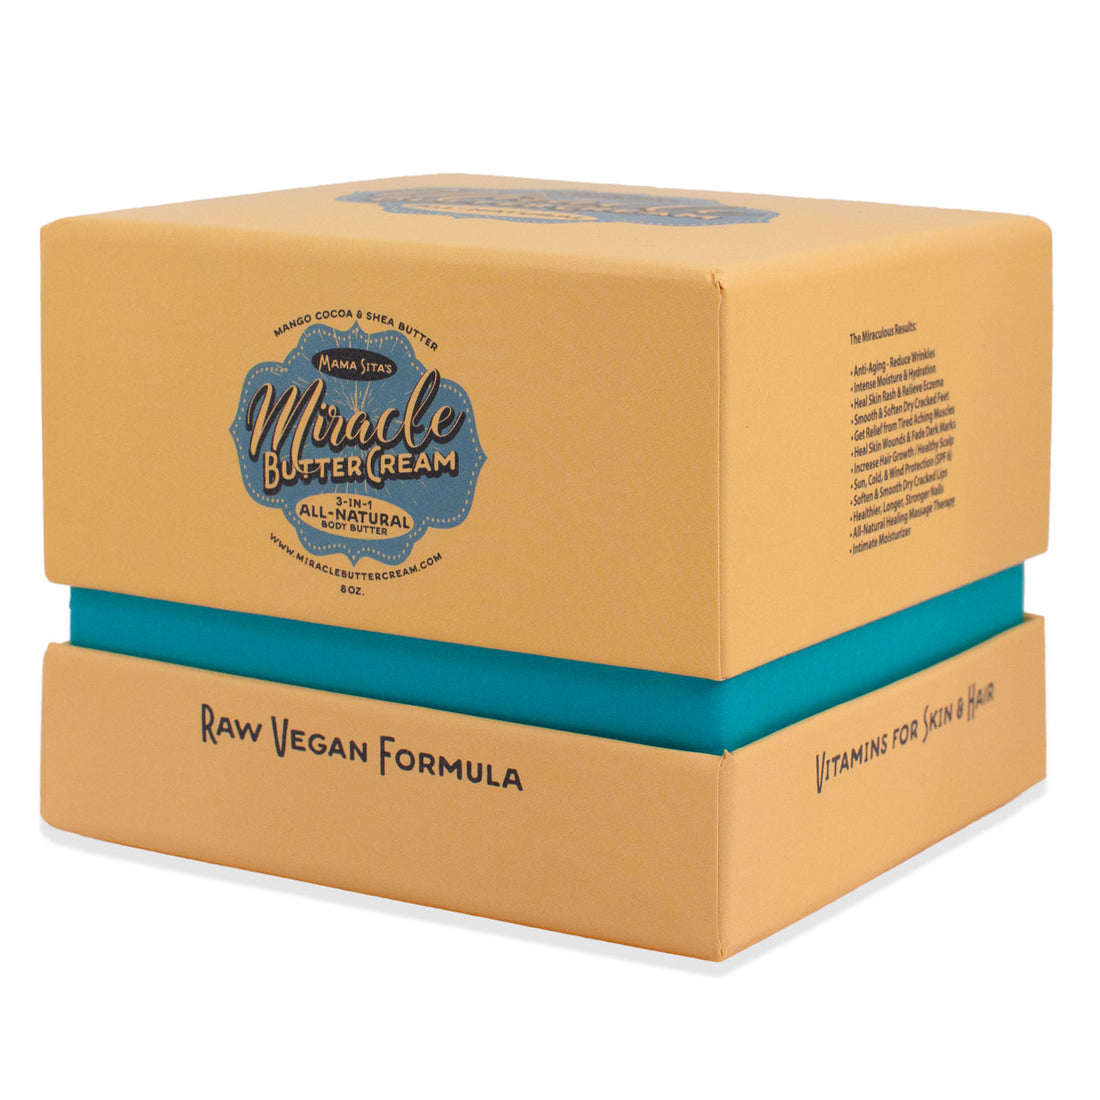 8oz. Miracle Butter Cream + Gift Box